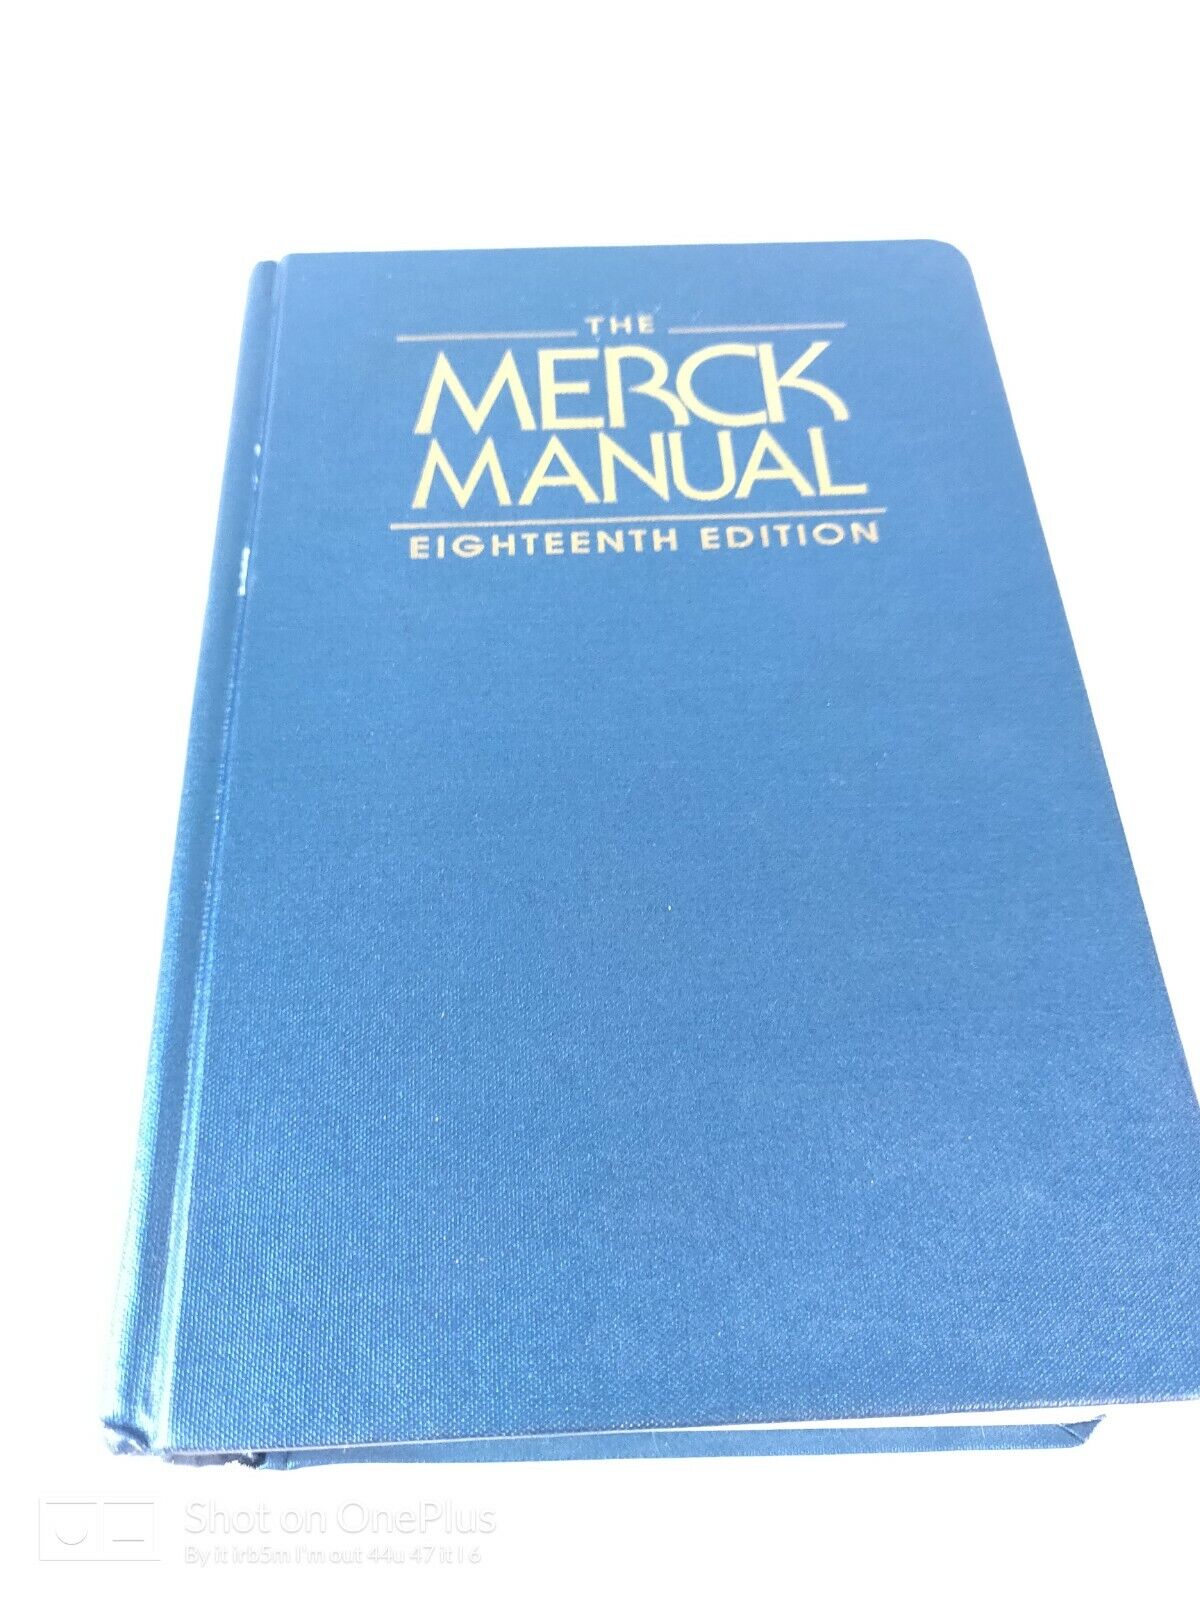 Merck Manual of Diagnosis and Therapy Indexed 2006 Eighteenth Edition